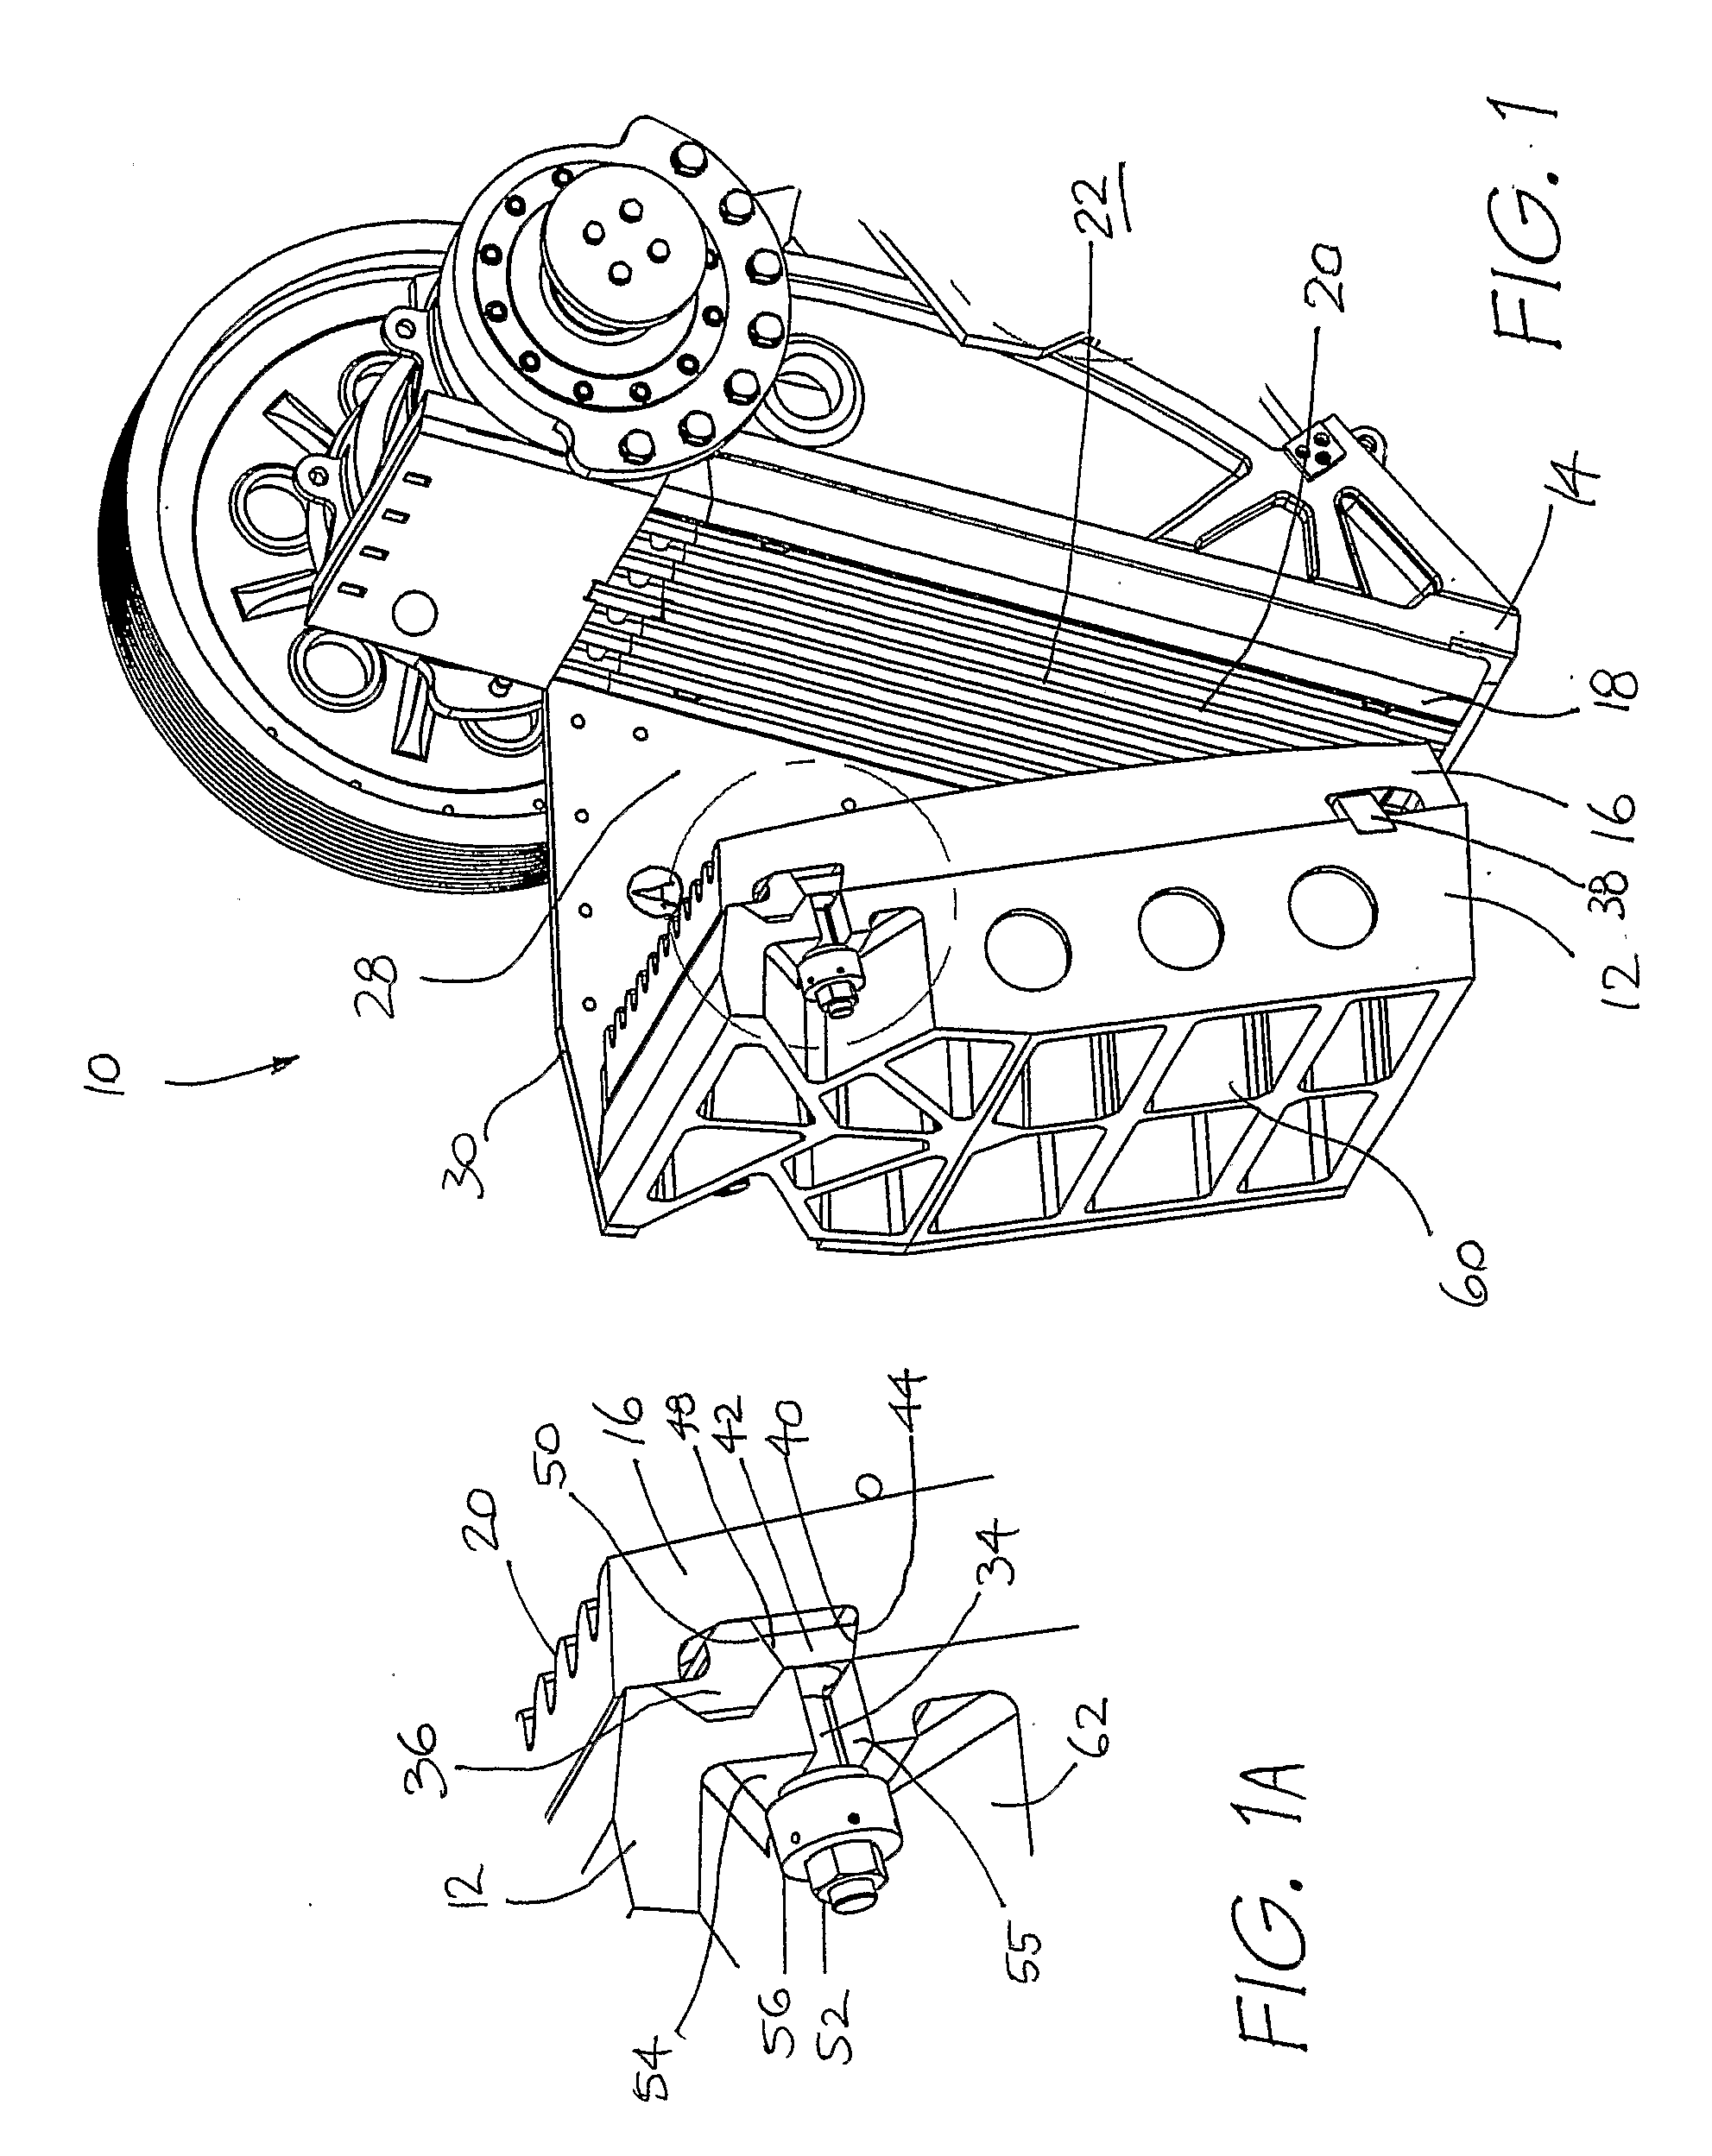 Jaw assembly for a jaw crusher